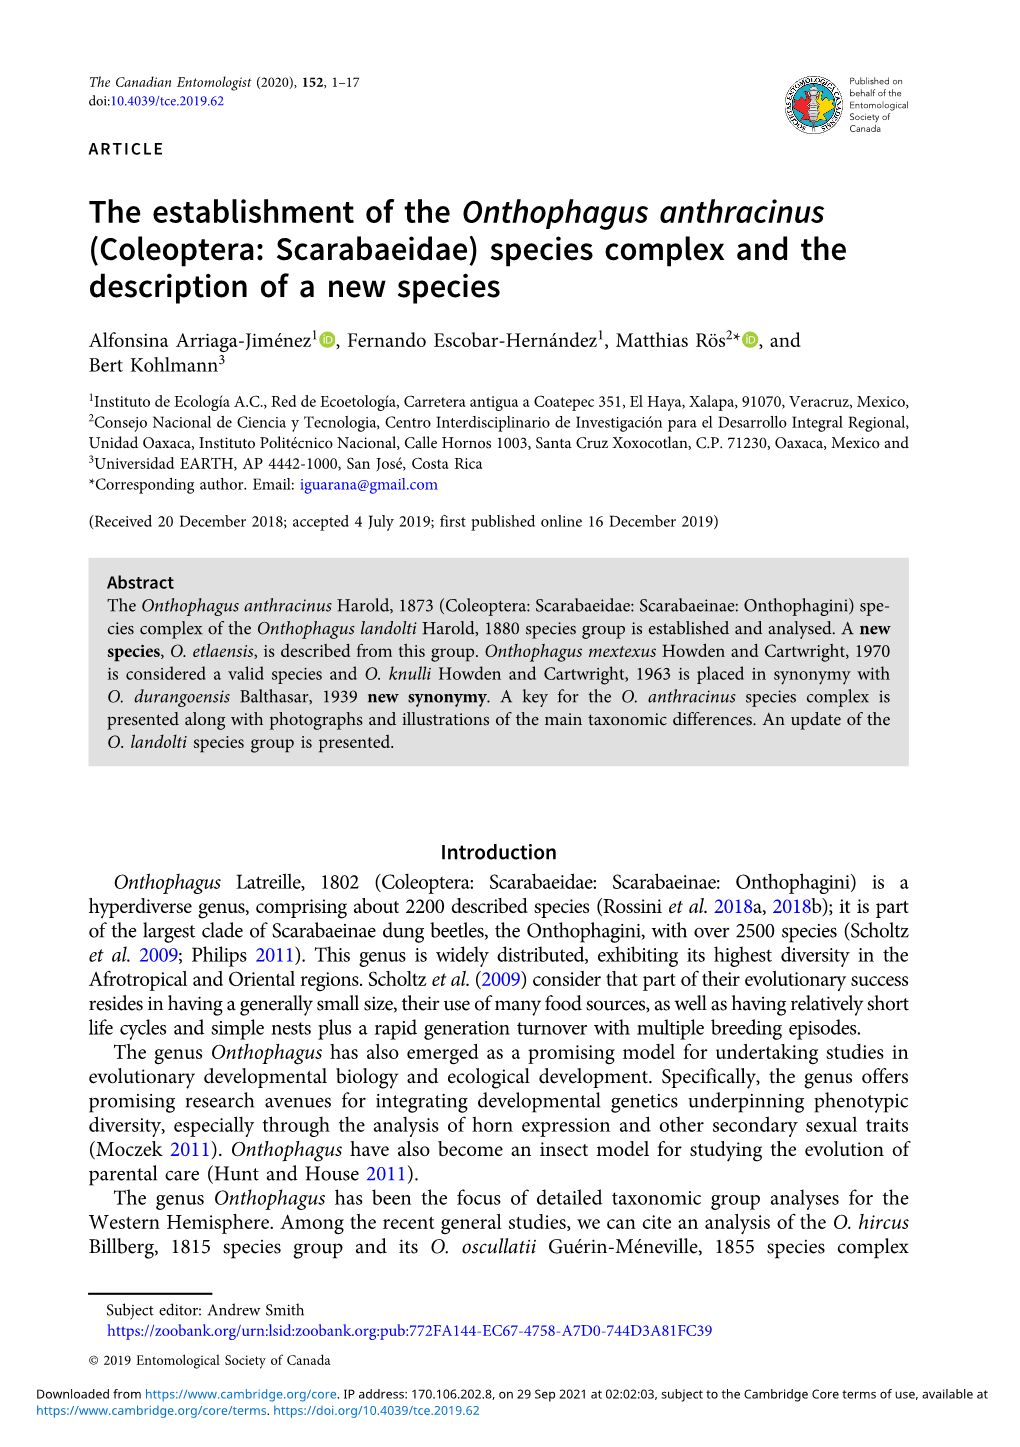 Coleoptera: Scarabaeidae) Species Complex and the Description of a New Species